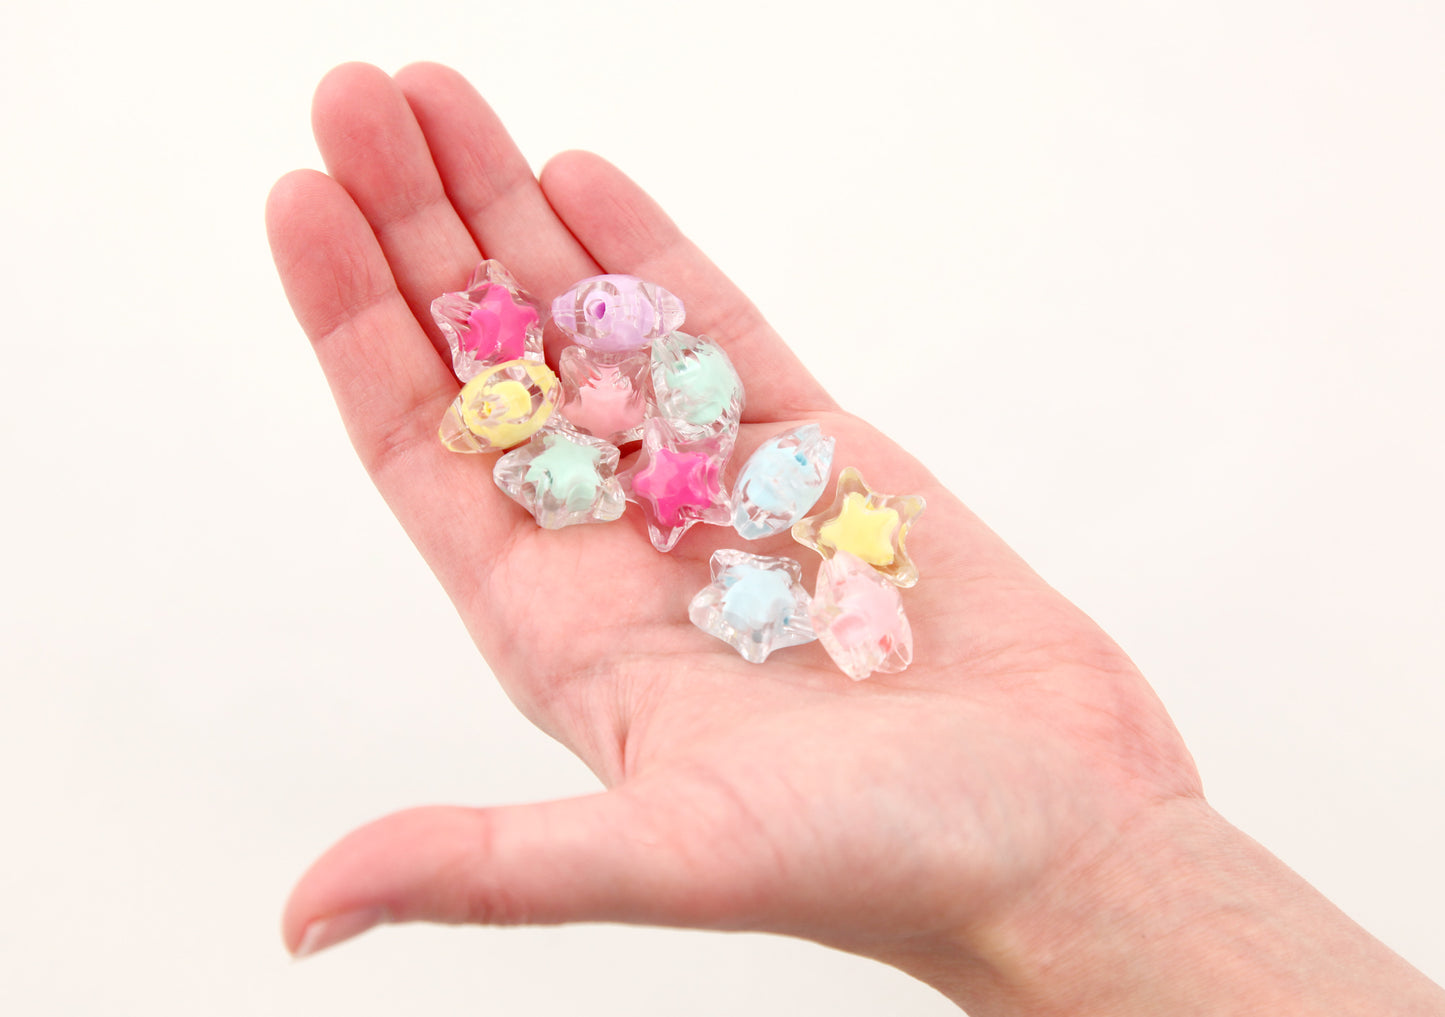 Pastel Star Beads - 20mm Bright Pastel Clear Shooting Star Resin or Acrylic Beads - 20 pc set